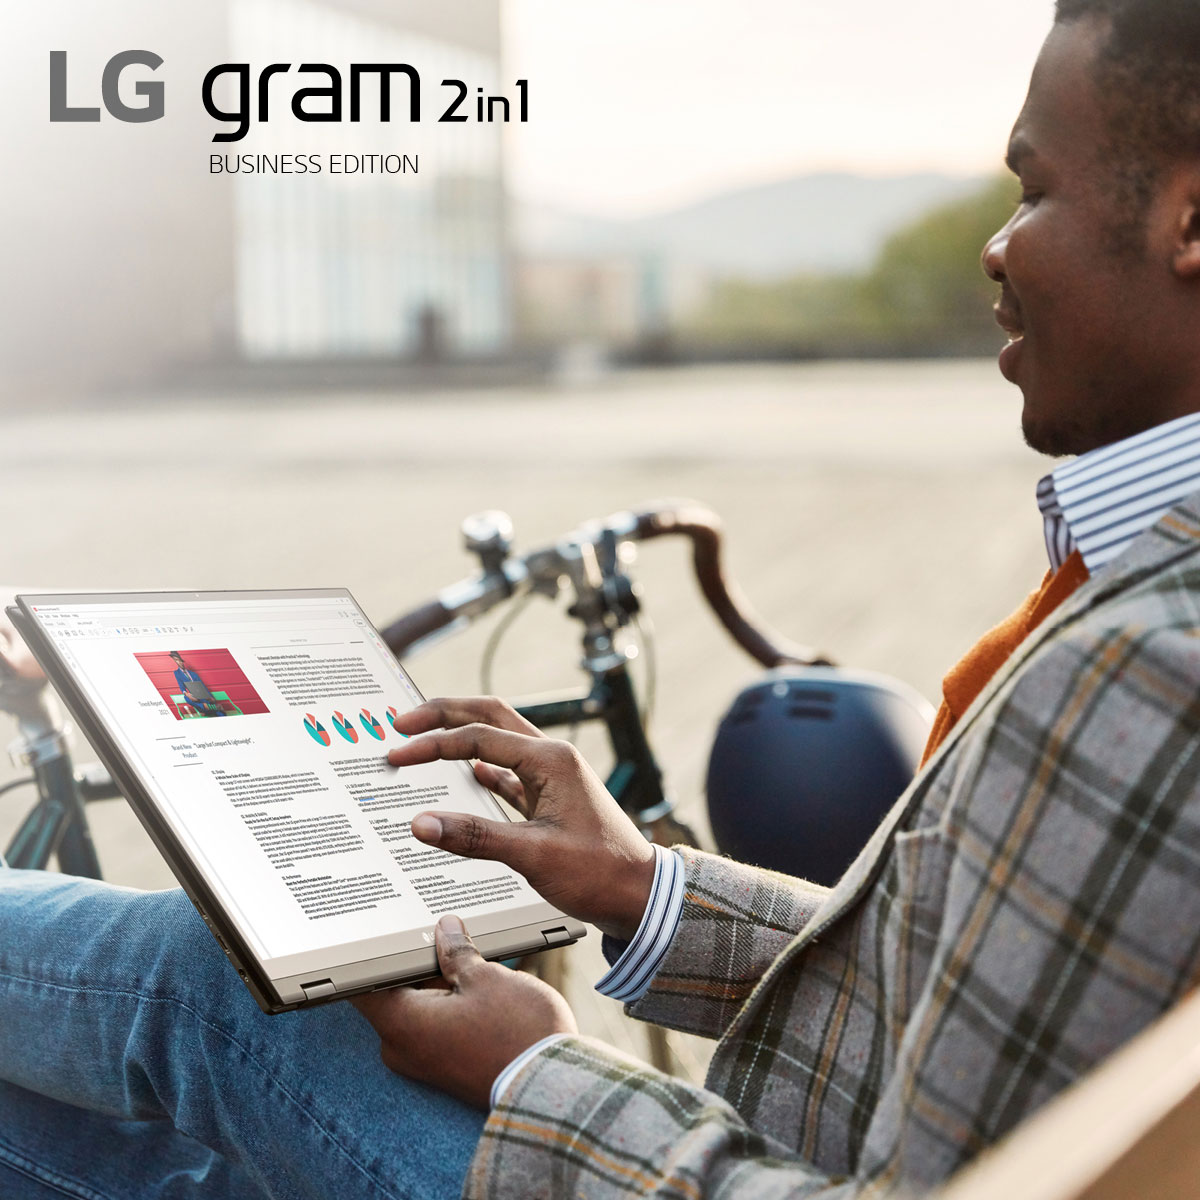 LG gram 2-in-1 Business Edition